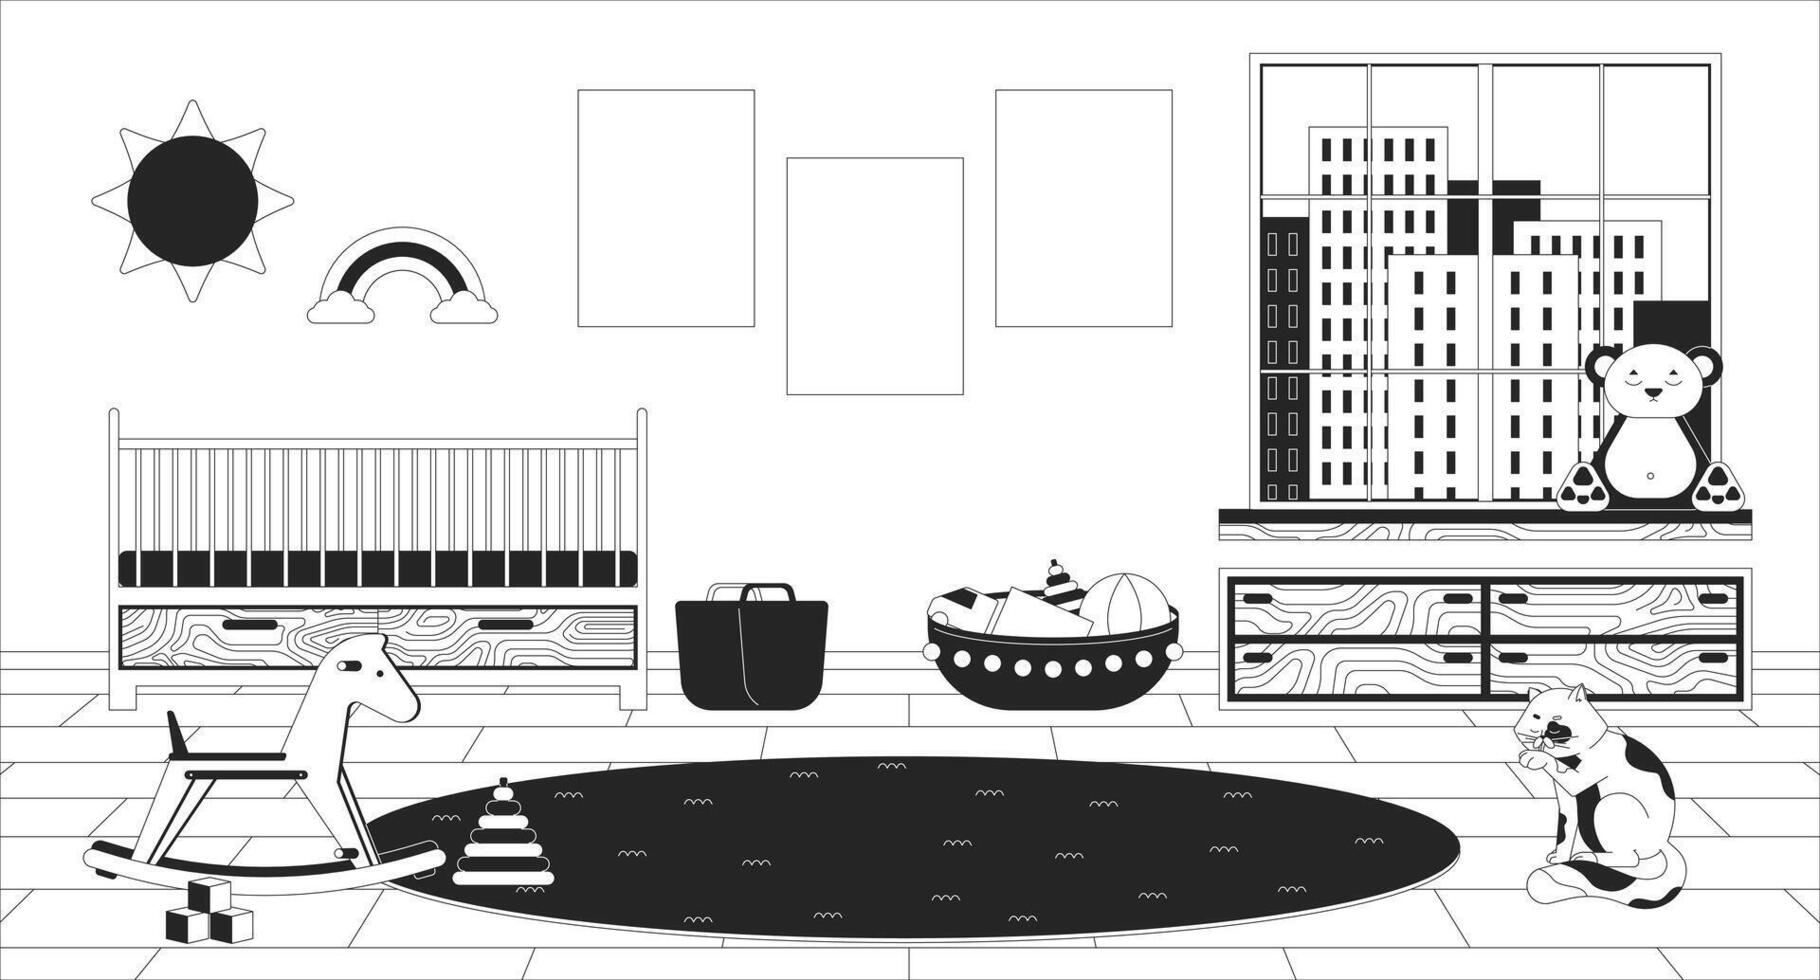 Baby nursery room black and white line illustration. Crib bed, round floor rug 2D interior monochrome background. Blank posters wall. Childhood toys. Childrens room outline scene vector image